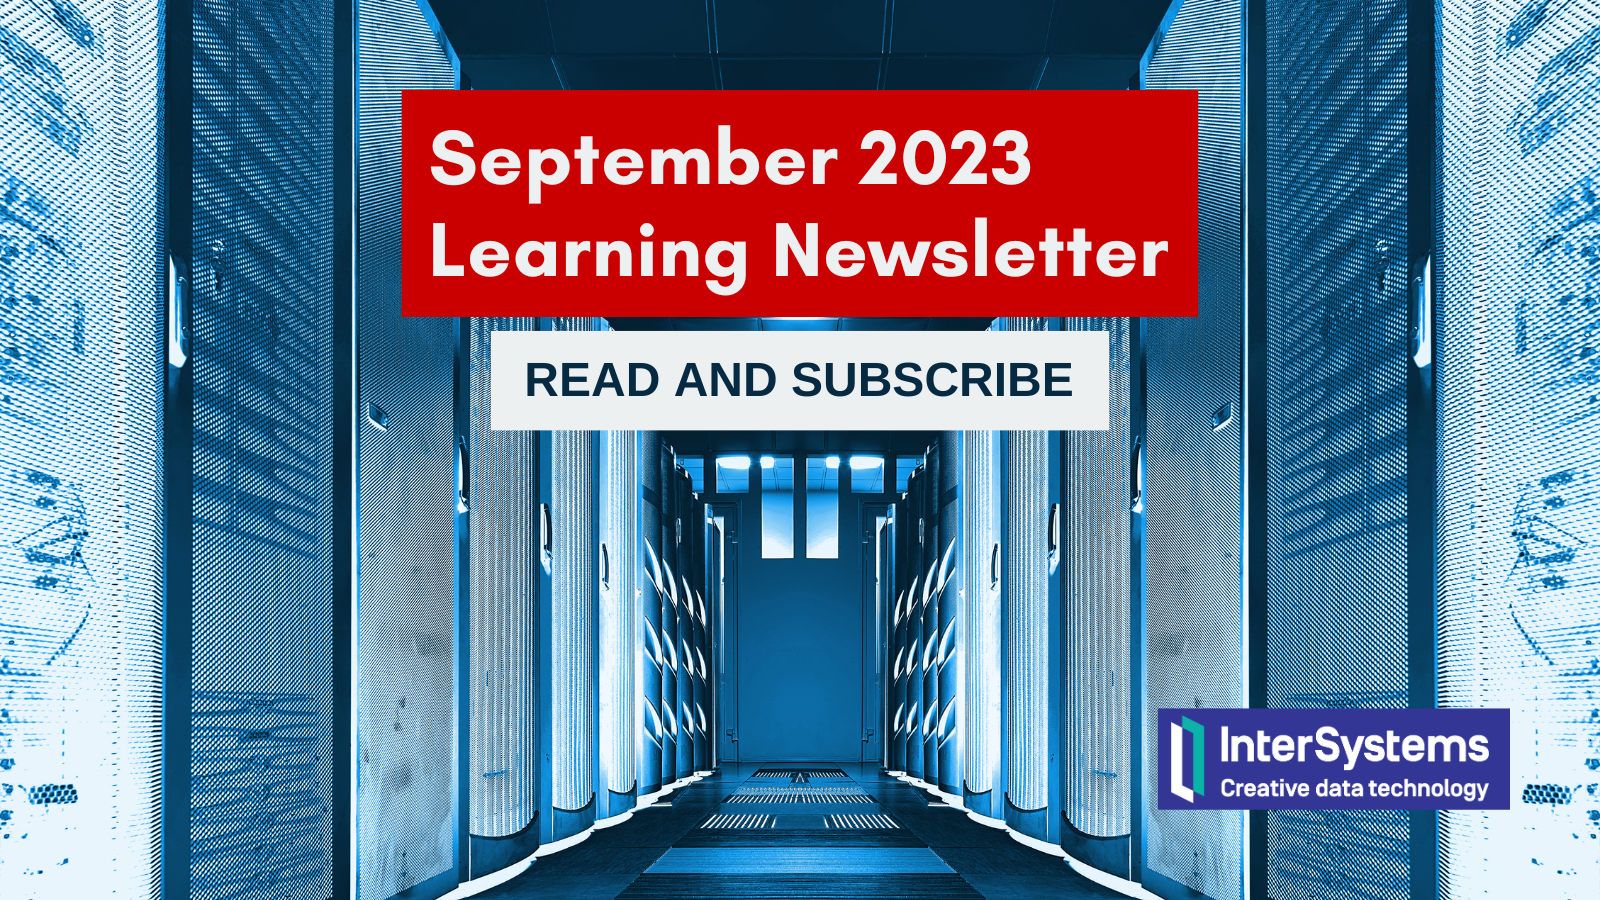 September 2023 Learning Newsletter: Read and Subscribe